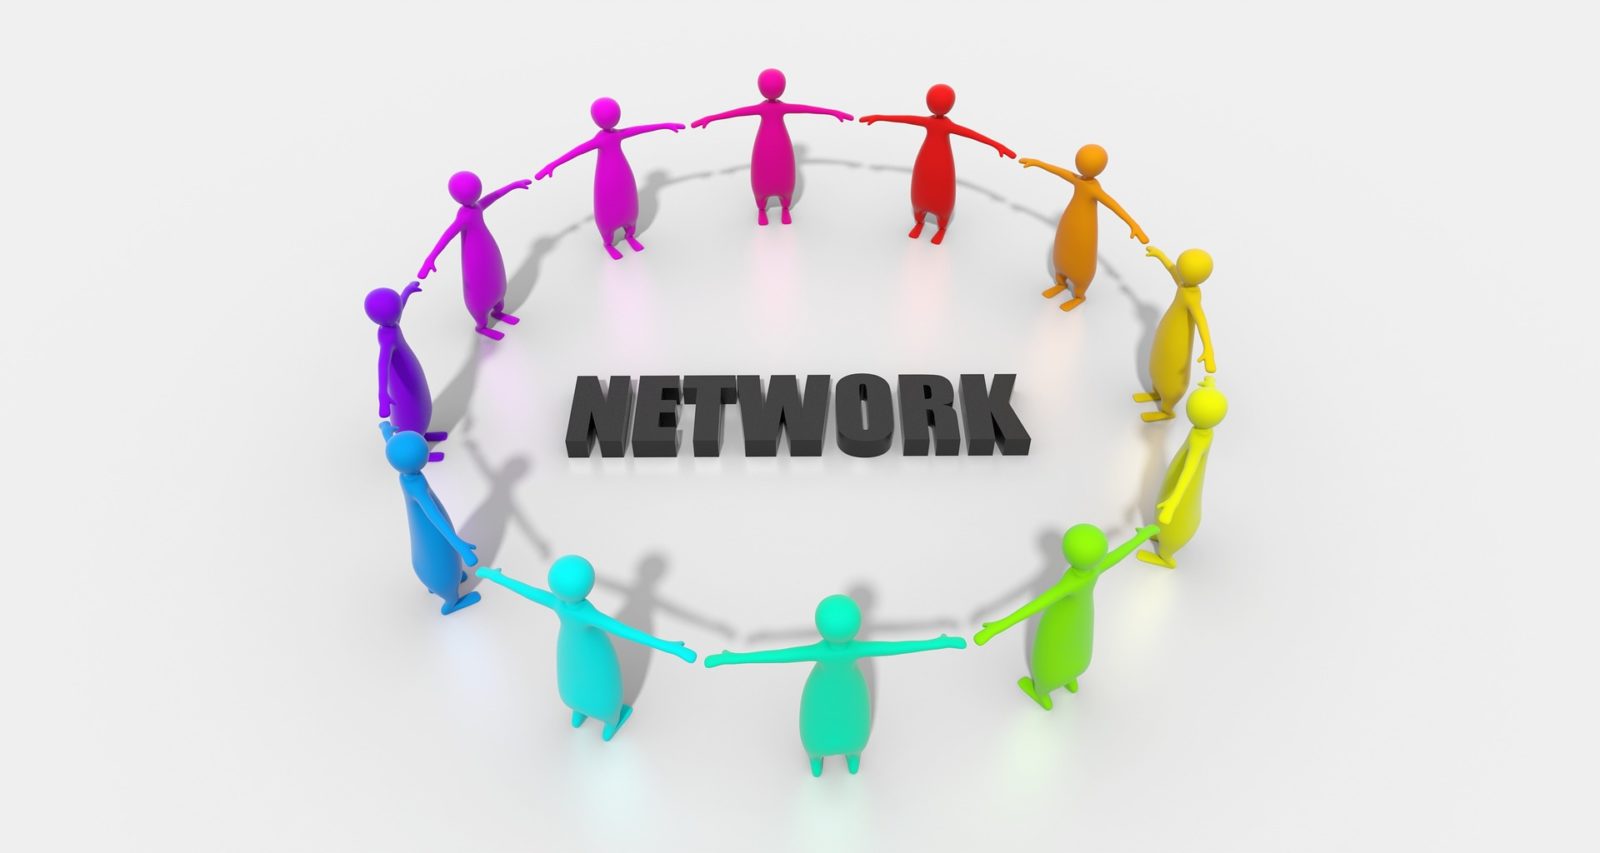 Training and networking opportunities. Image by Arek Socha from Pixabay